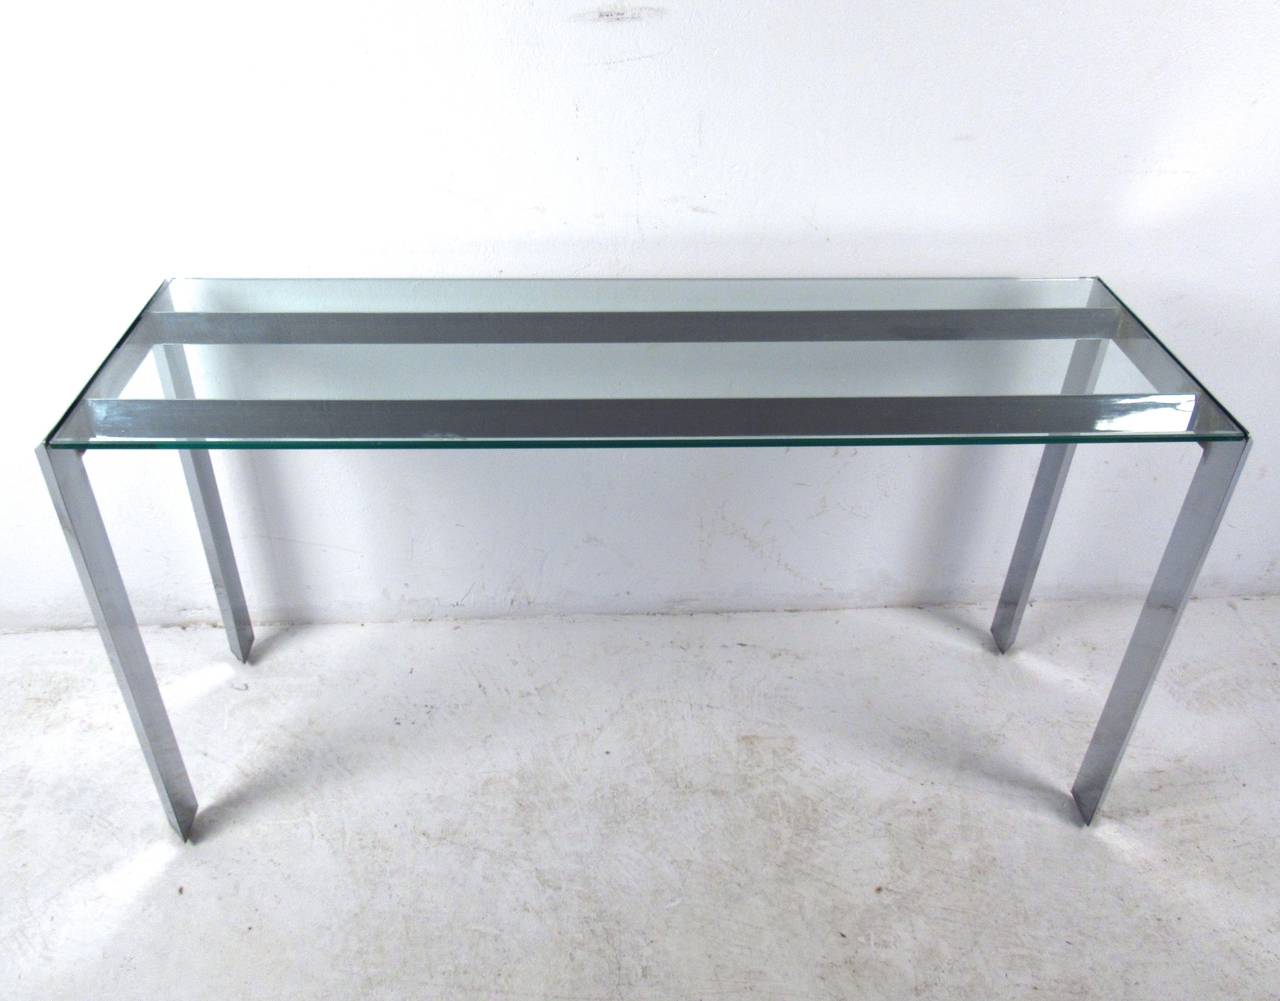 This beautiful console table features a wonderful vintage chrome finish and unique angular  design. Perfect for entry ways, hall use, or as a sofa table for home or office. Please confirm item location (NY or NJ). Pair of side tables available.